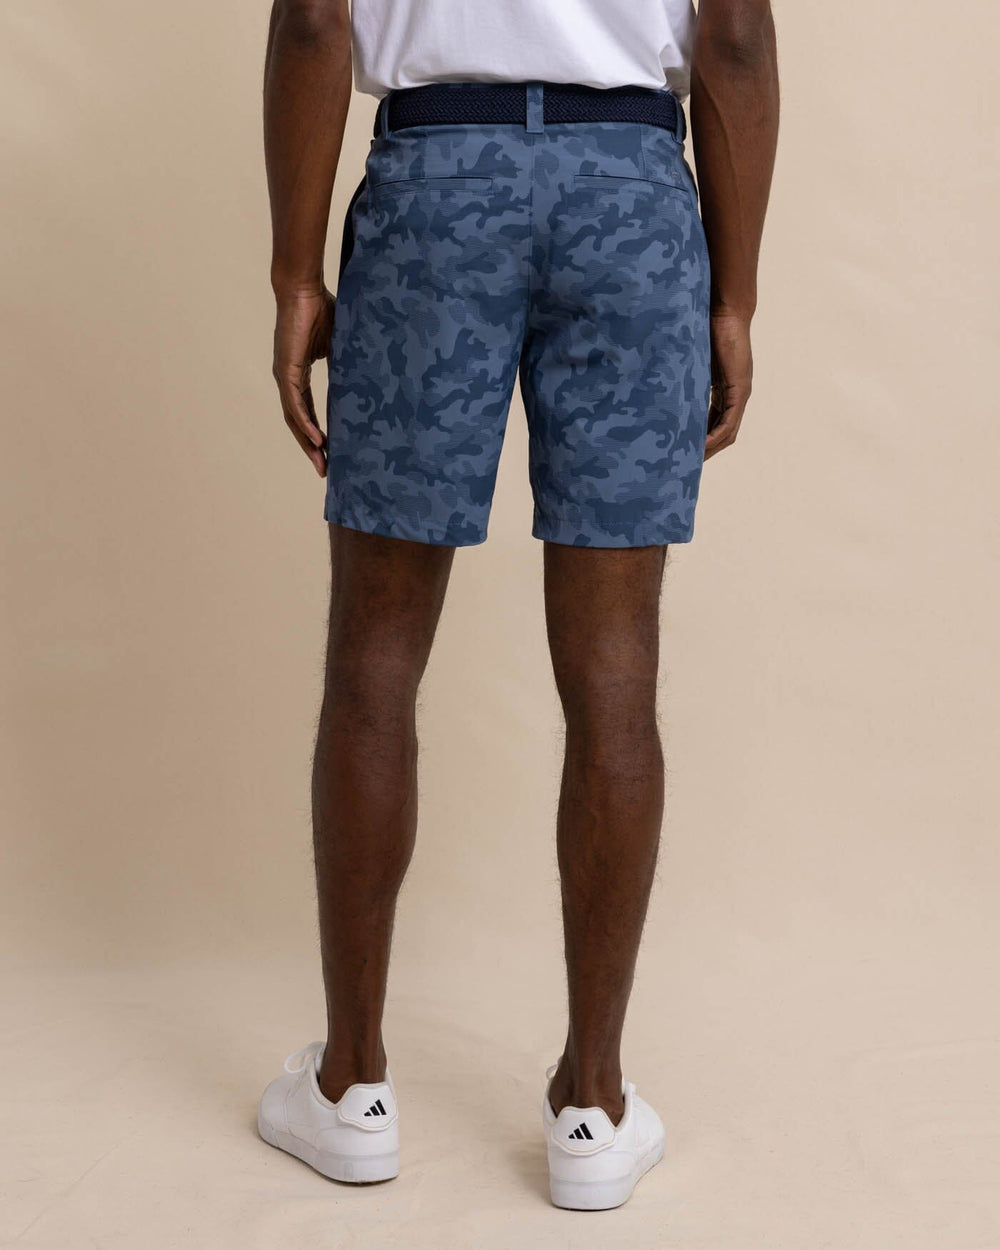 The back view of the Southern Tide brrr die Island Camo Printed Short by Southern Tide - Dark Seas